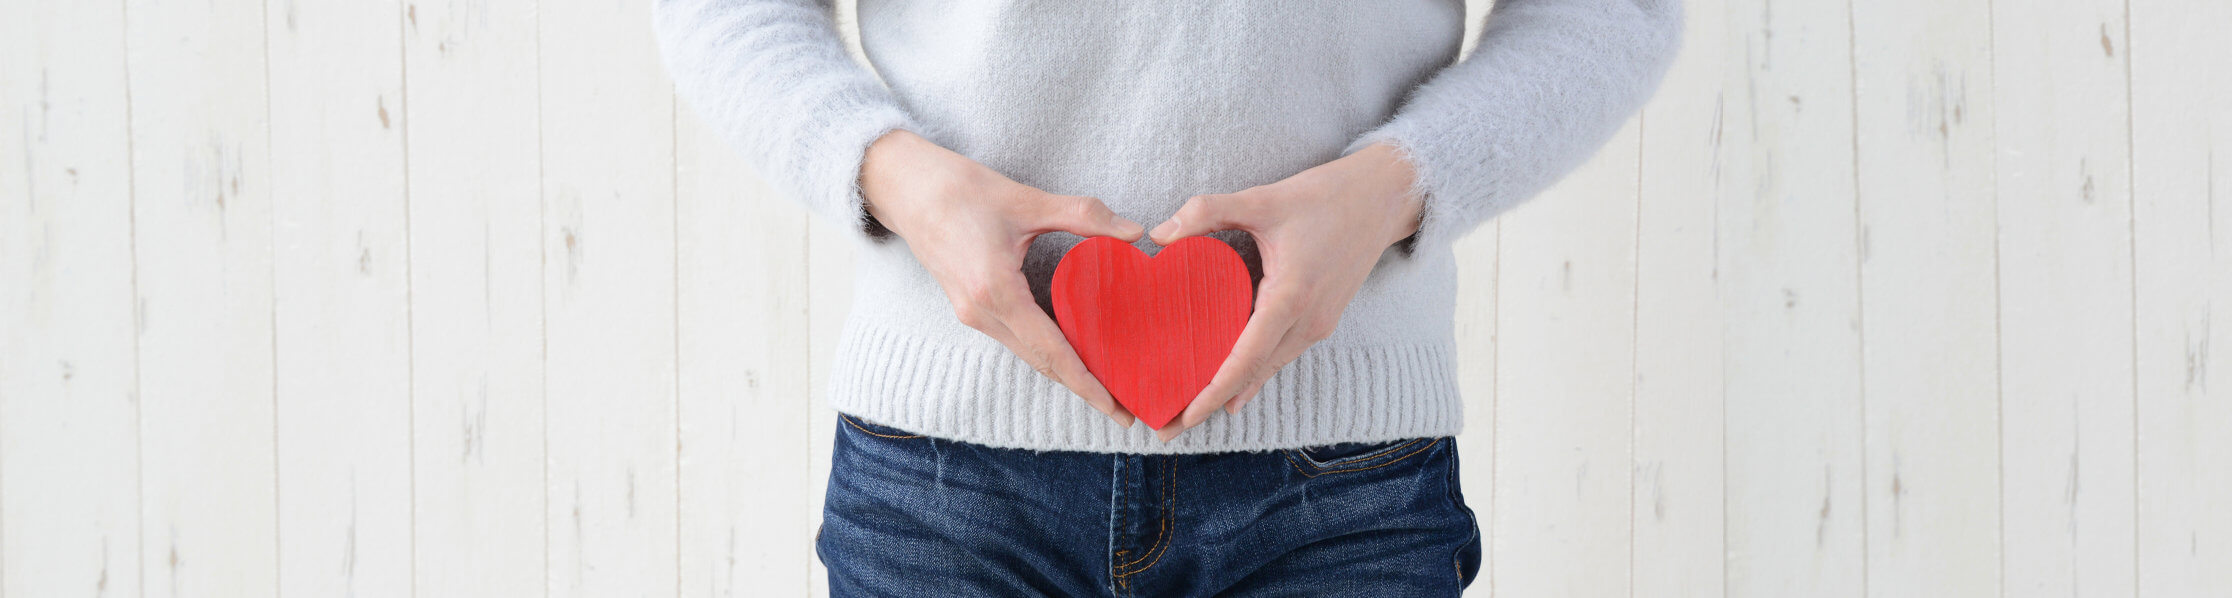 person holding a red heart shape with heart-shaped hands in front of their belly